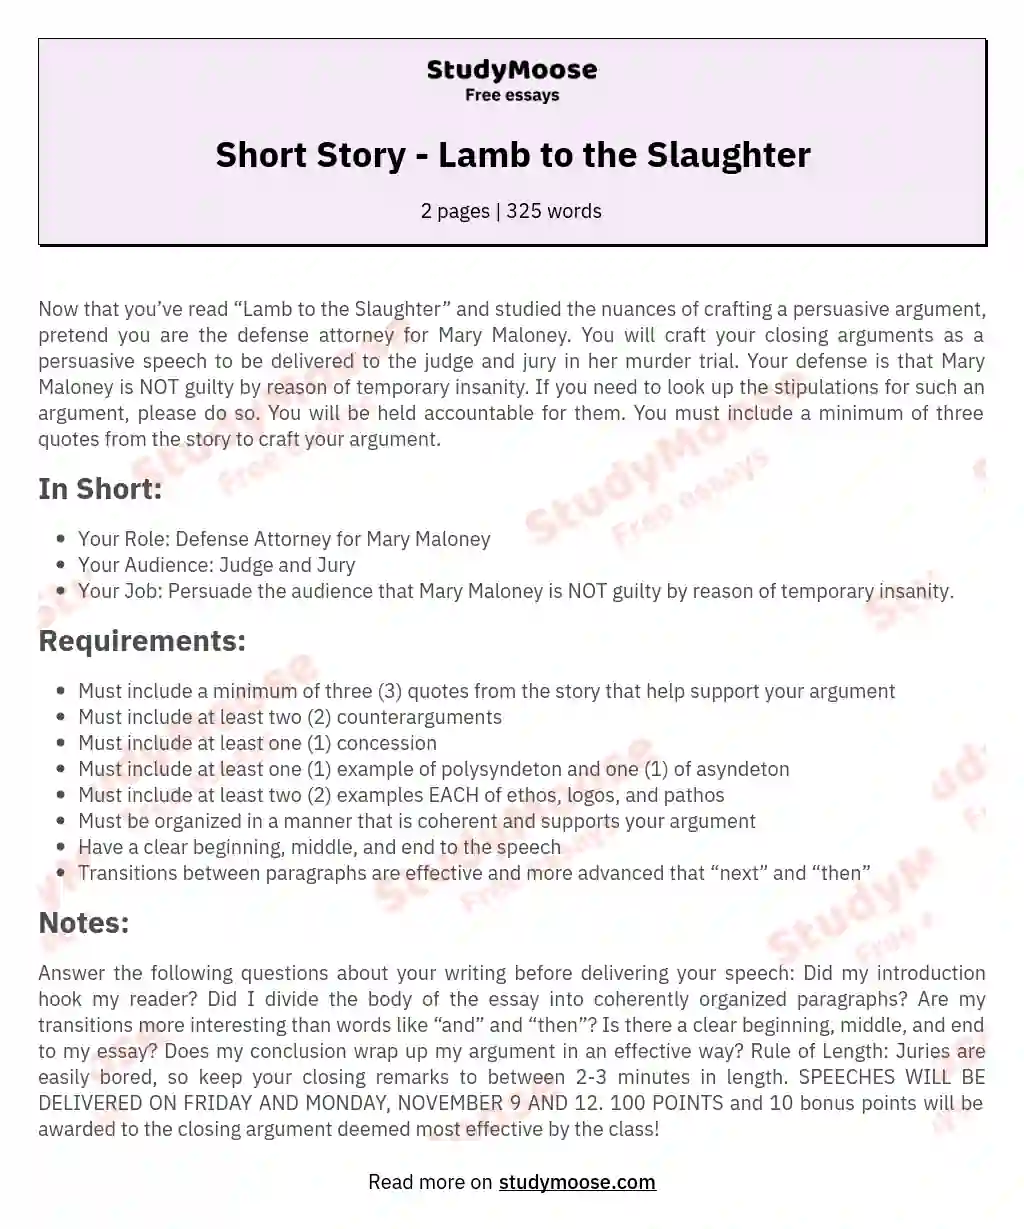 Short Story - Lamb to the Slaughter